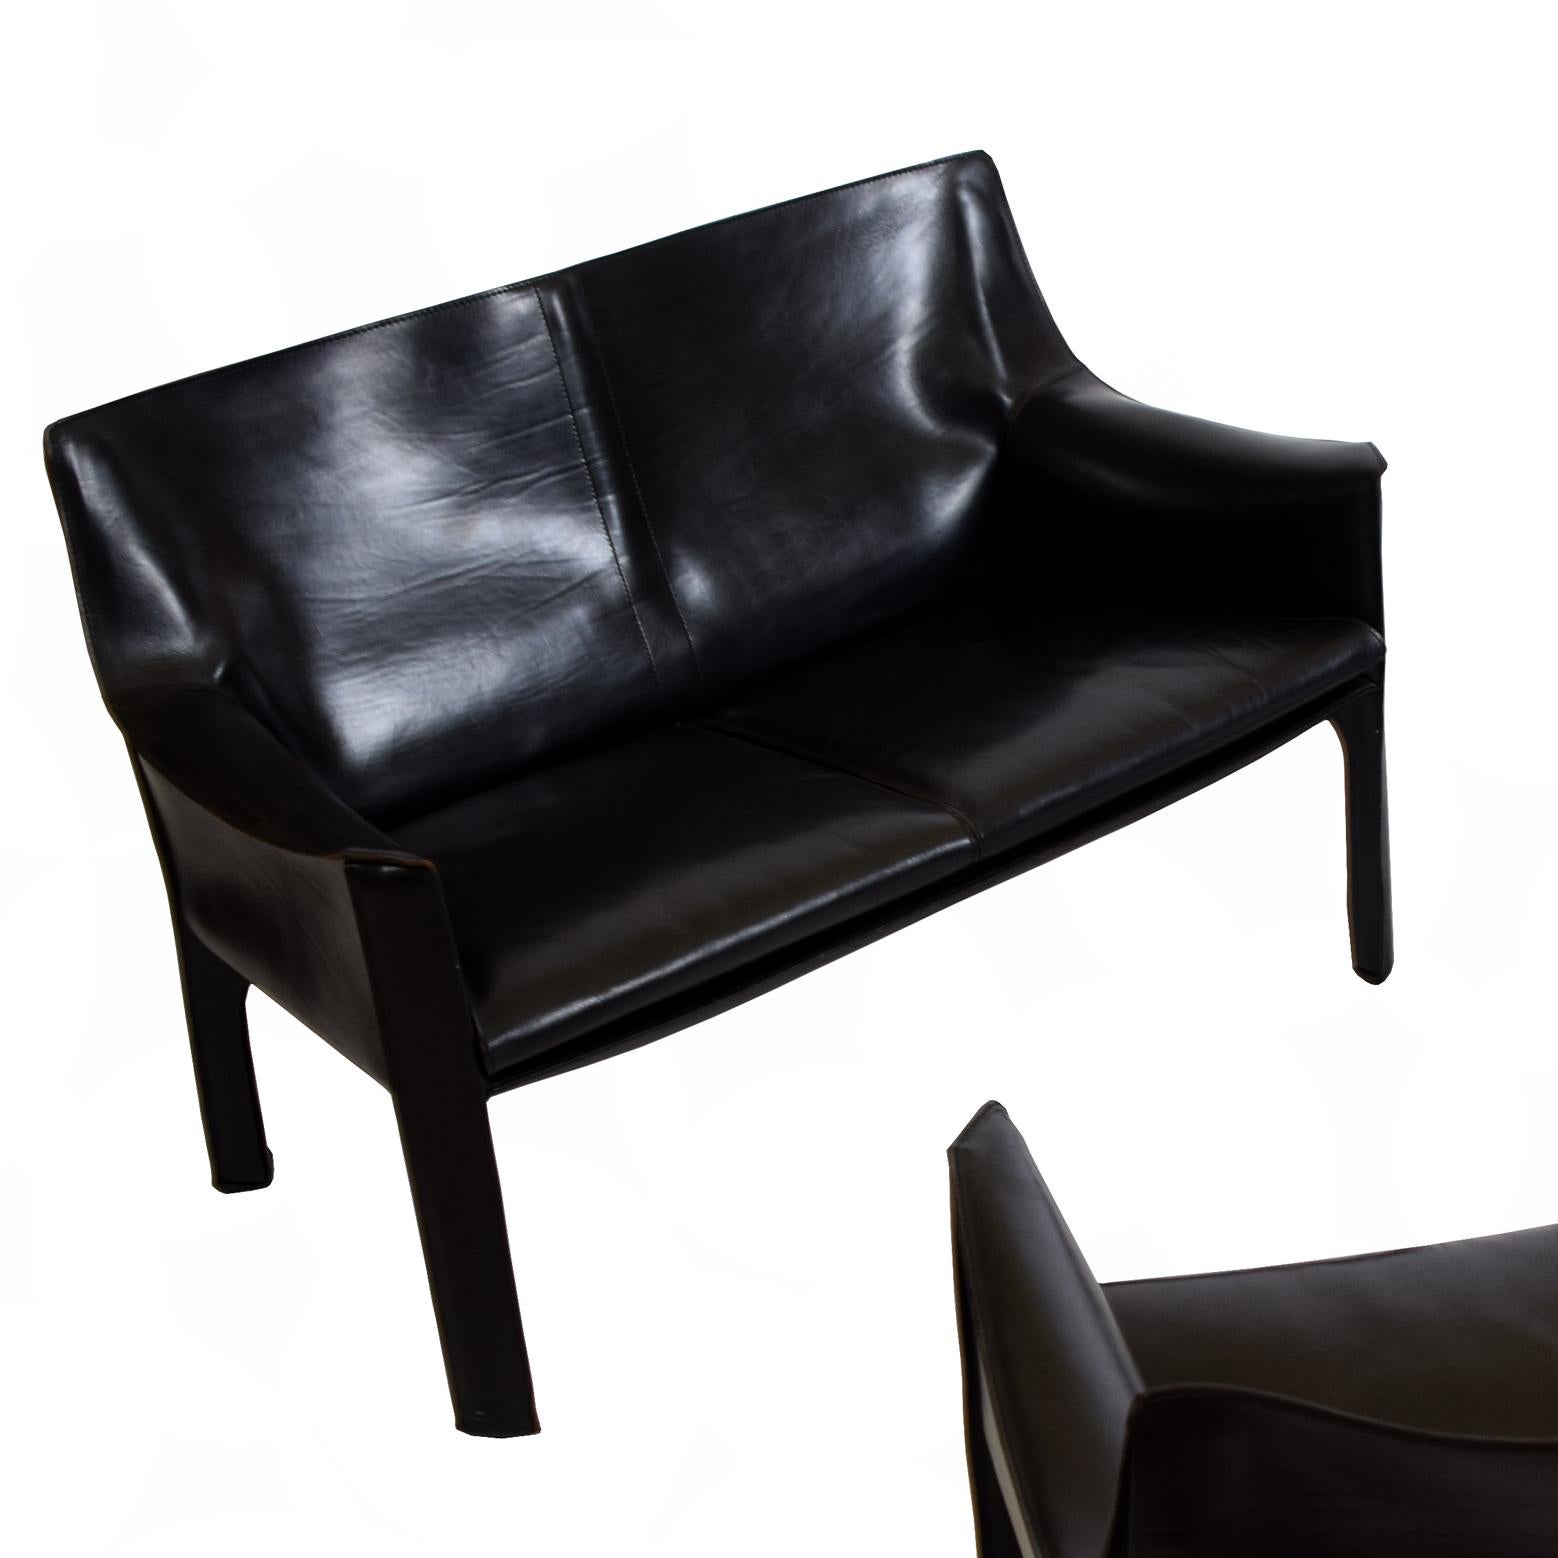 Arm chairs SOLD  settee designed by Mario Bellini in 1979 for Cassina, Italy. Steel frame covered with a thick black leather. Stamped with Cassina logo.